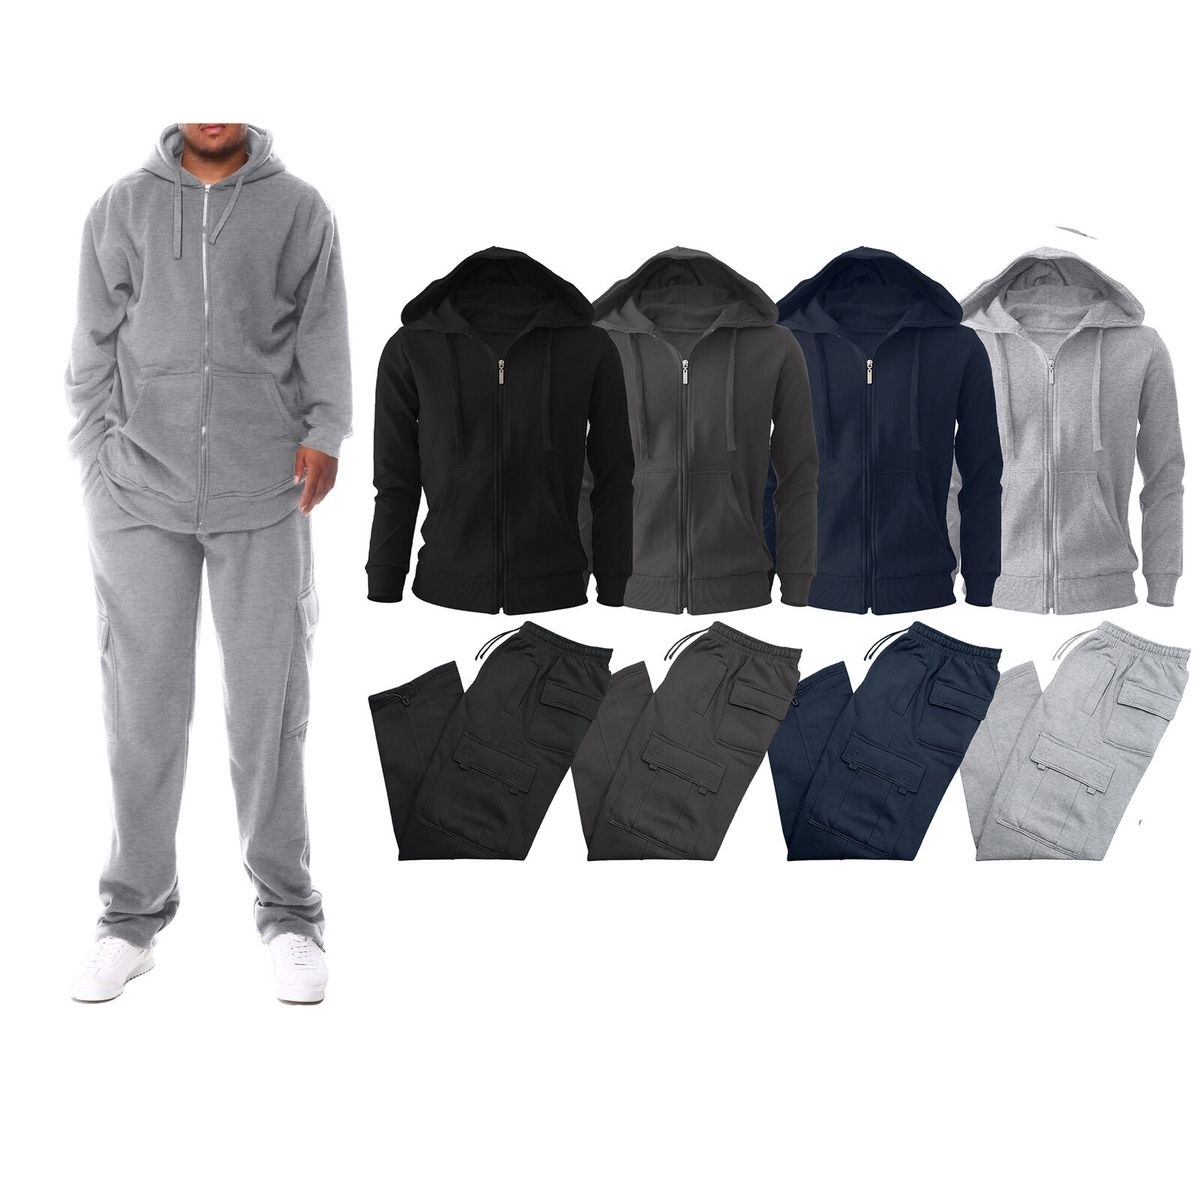 Multi-Pack: Men's Big & Tall Winter Warm Athletic Active Cozy Fleece Lined Multi-Pocket Full Zip Up Cargo Tracksuit - Grey, 1-pack, 3xl